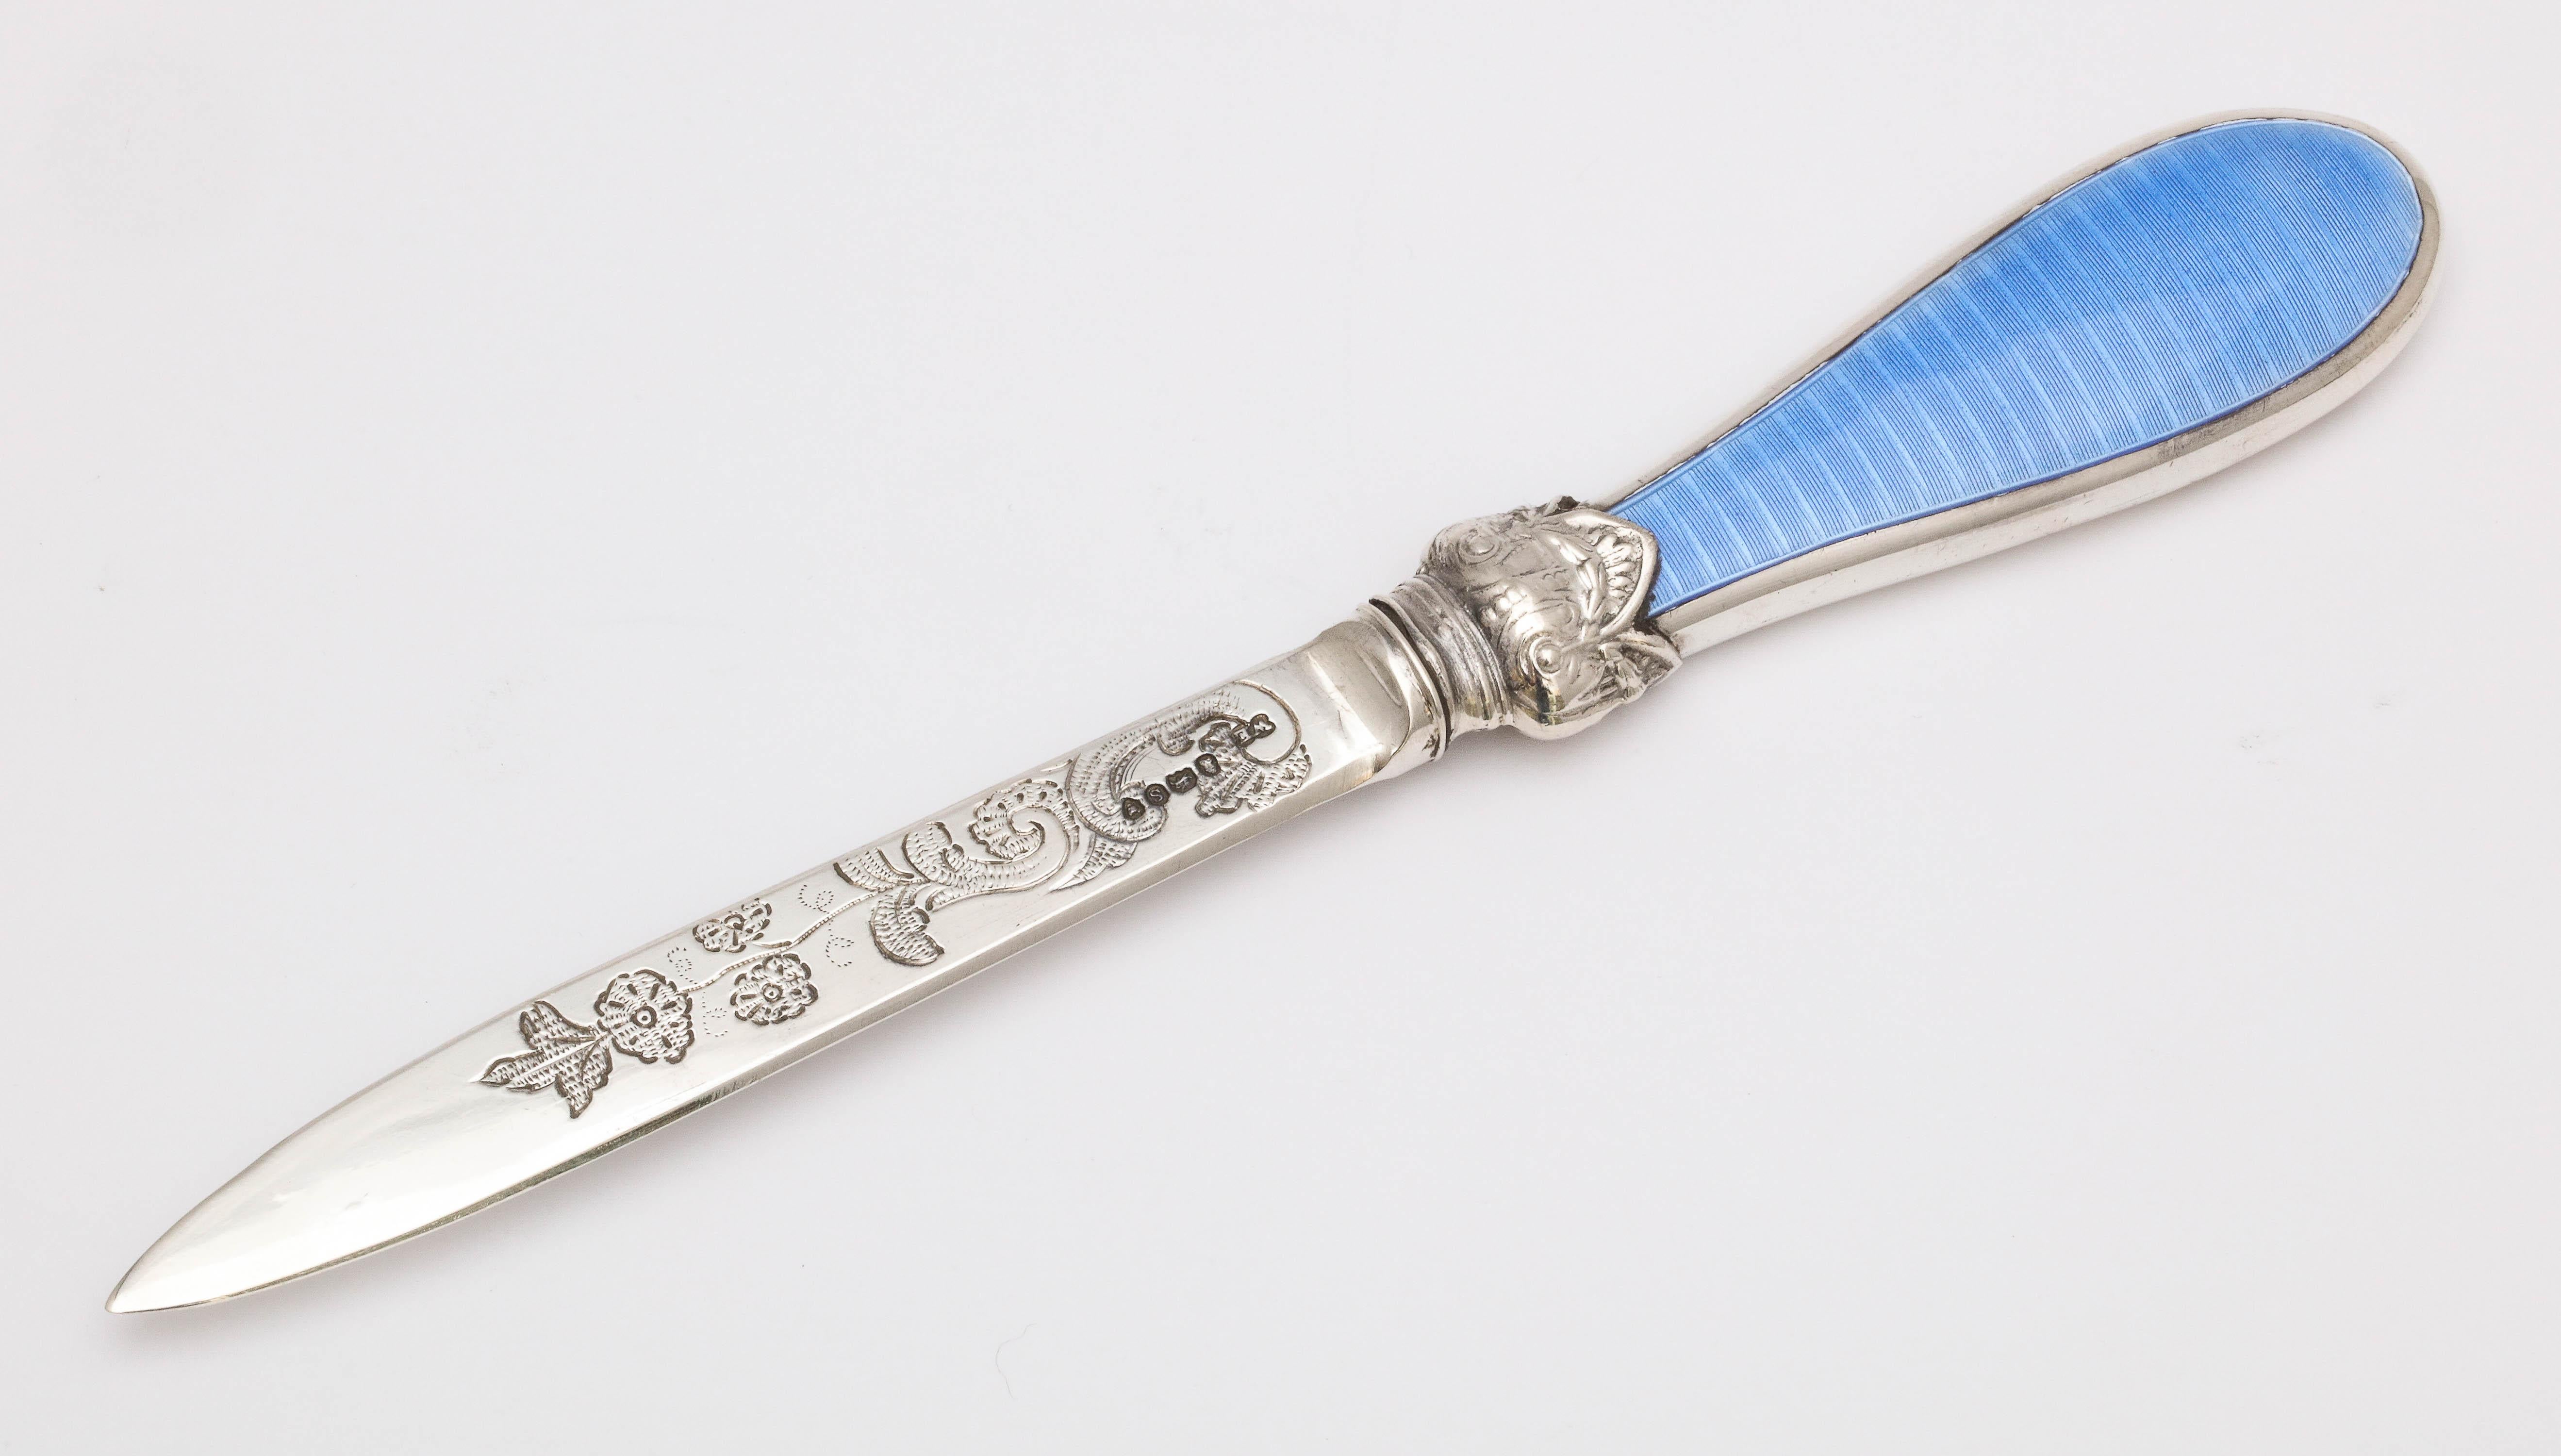 William IV, sterling silver and blue guilloche enamel letter opener/paper knife, London, year hallmarked for 1833, William Eaton - maker. Sterling silver blade is etched with flowers, leaves and swirls. Blue guilloche enamel is on one side of the